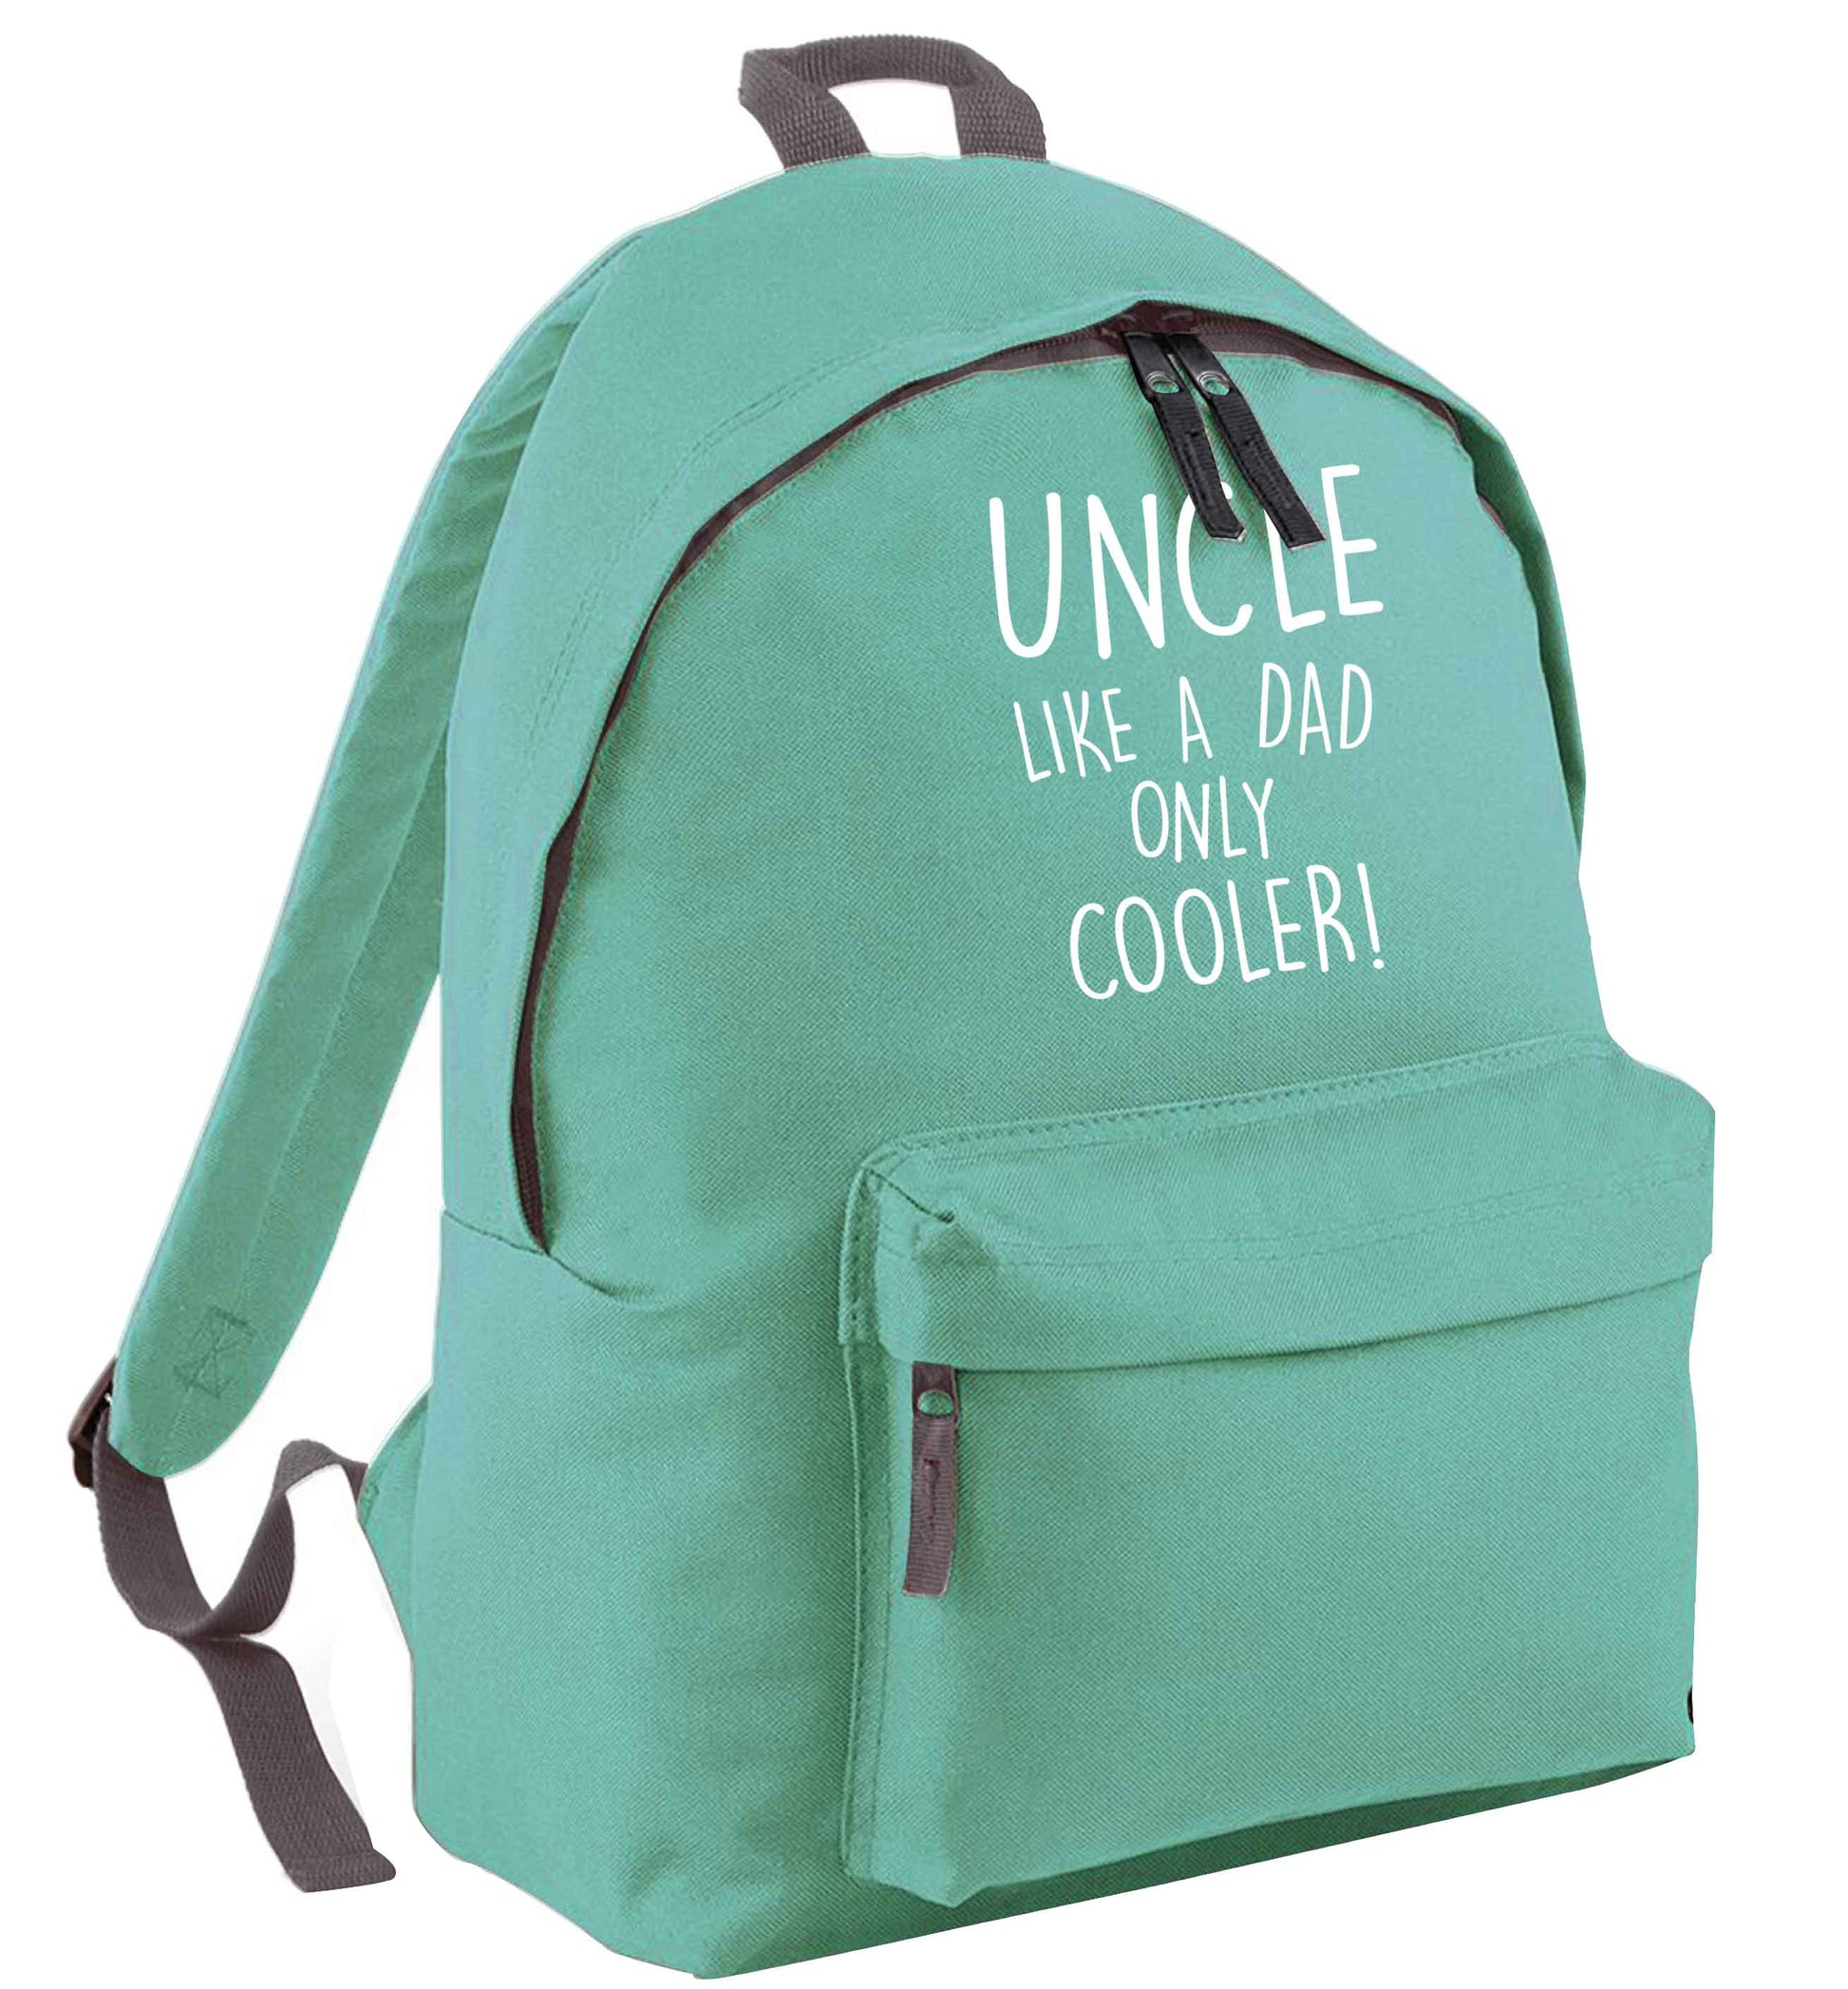 Uncle like a dad only cooler mint adults backpack